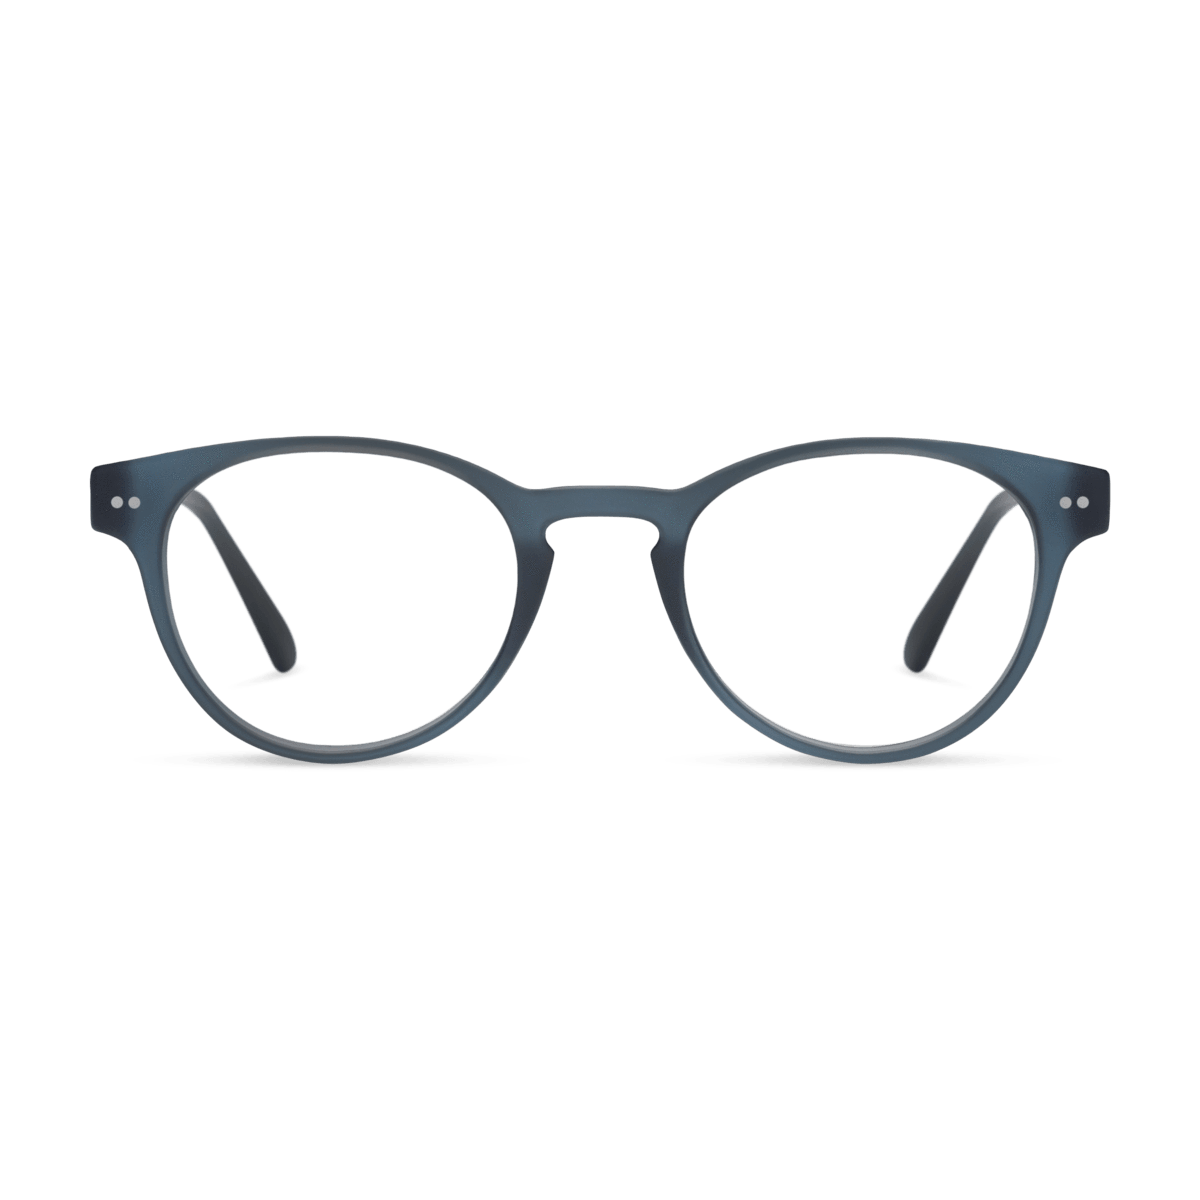 Abbey Readers READING GLASSES LOOK OPTIC Reader Navy +1.00